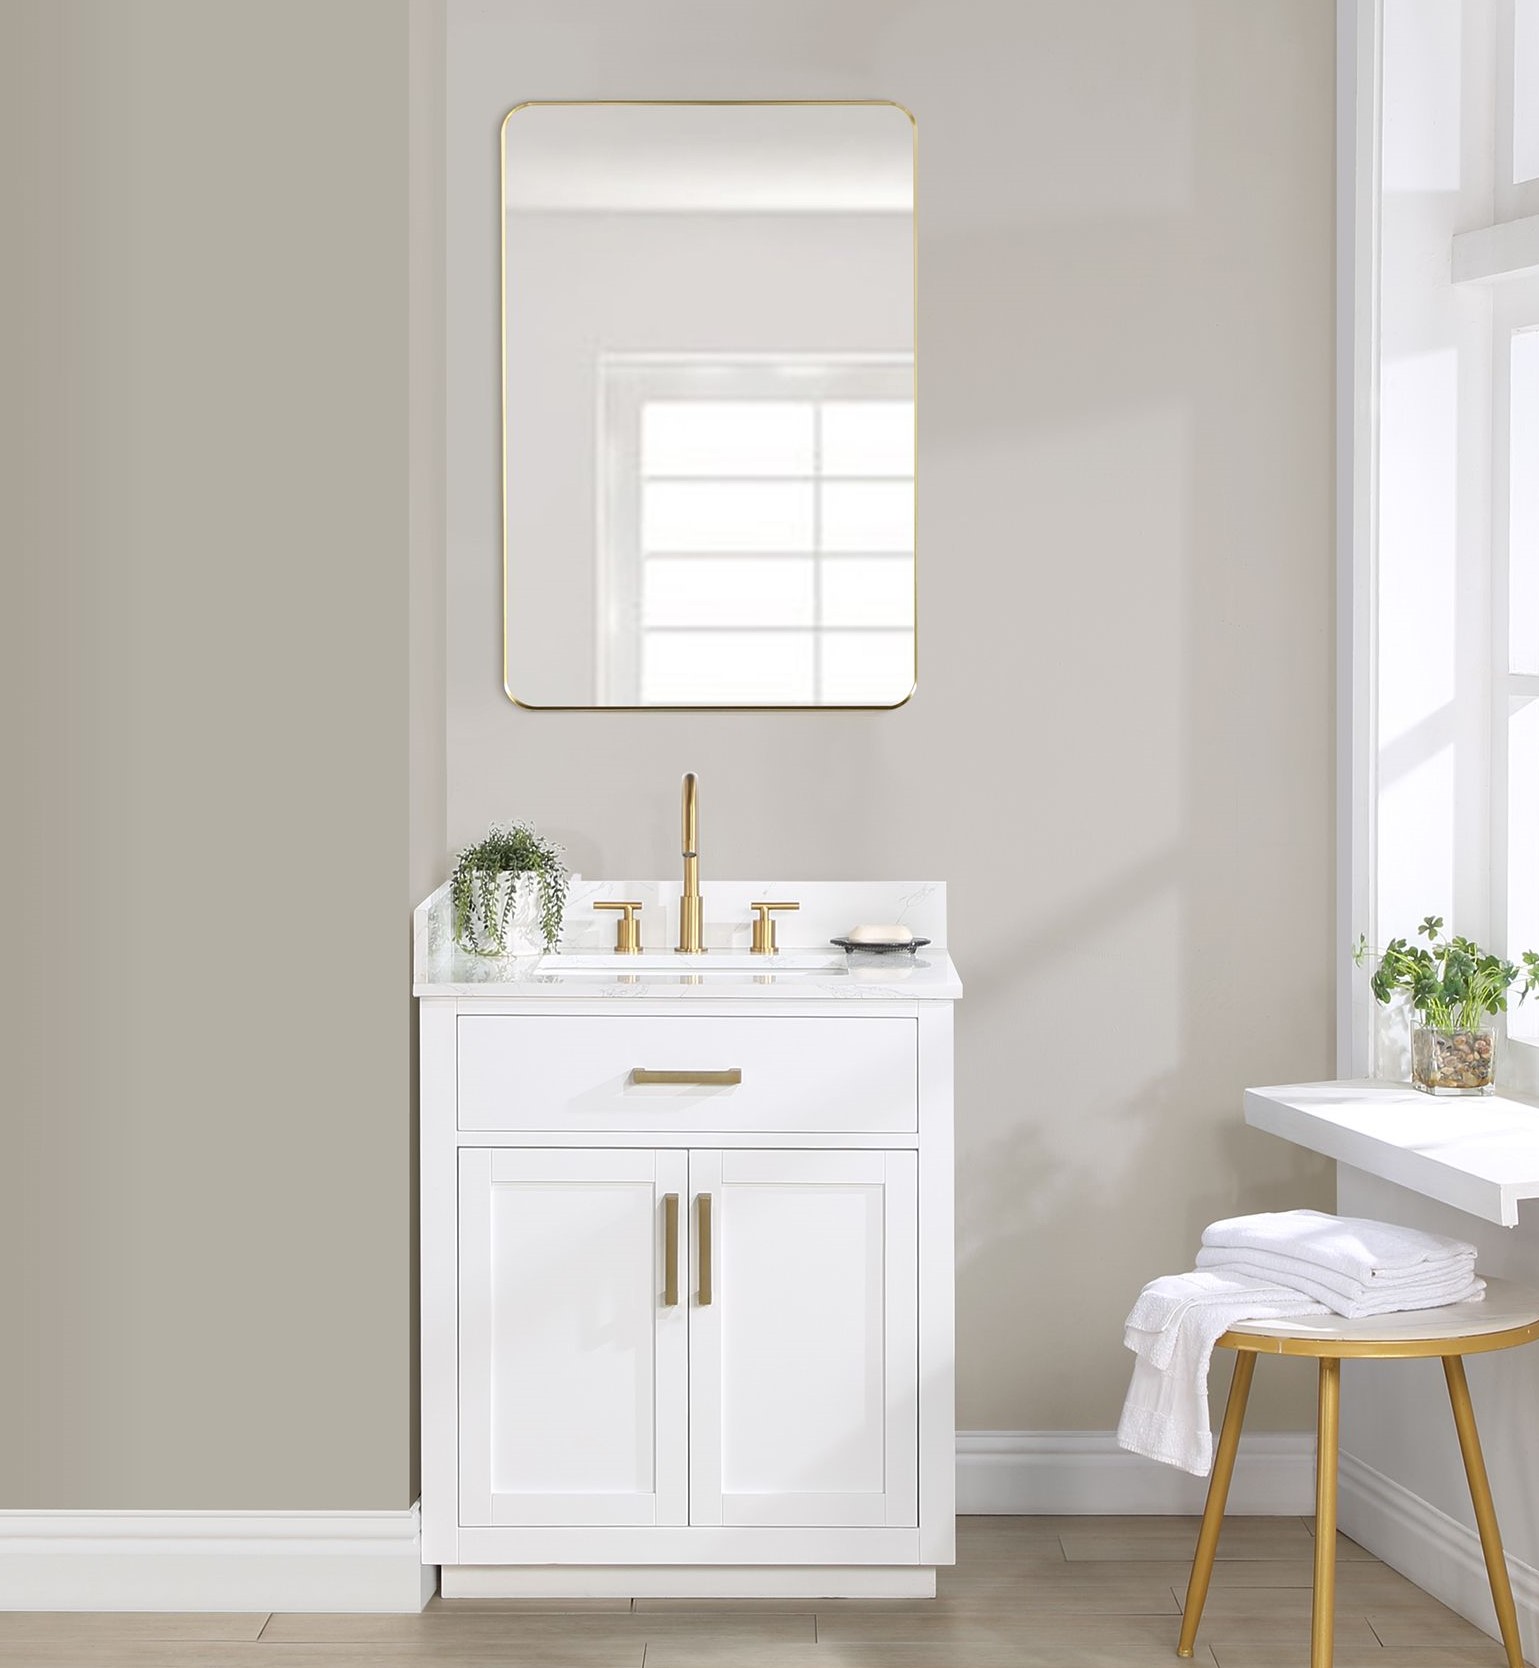 Issac Edwards 30" Single Bathroom Vanity in White with Grain White Composite Stone Countertop with Mirror